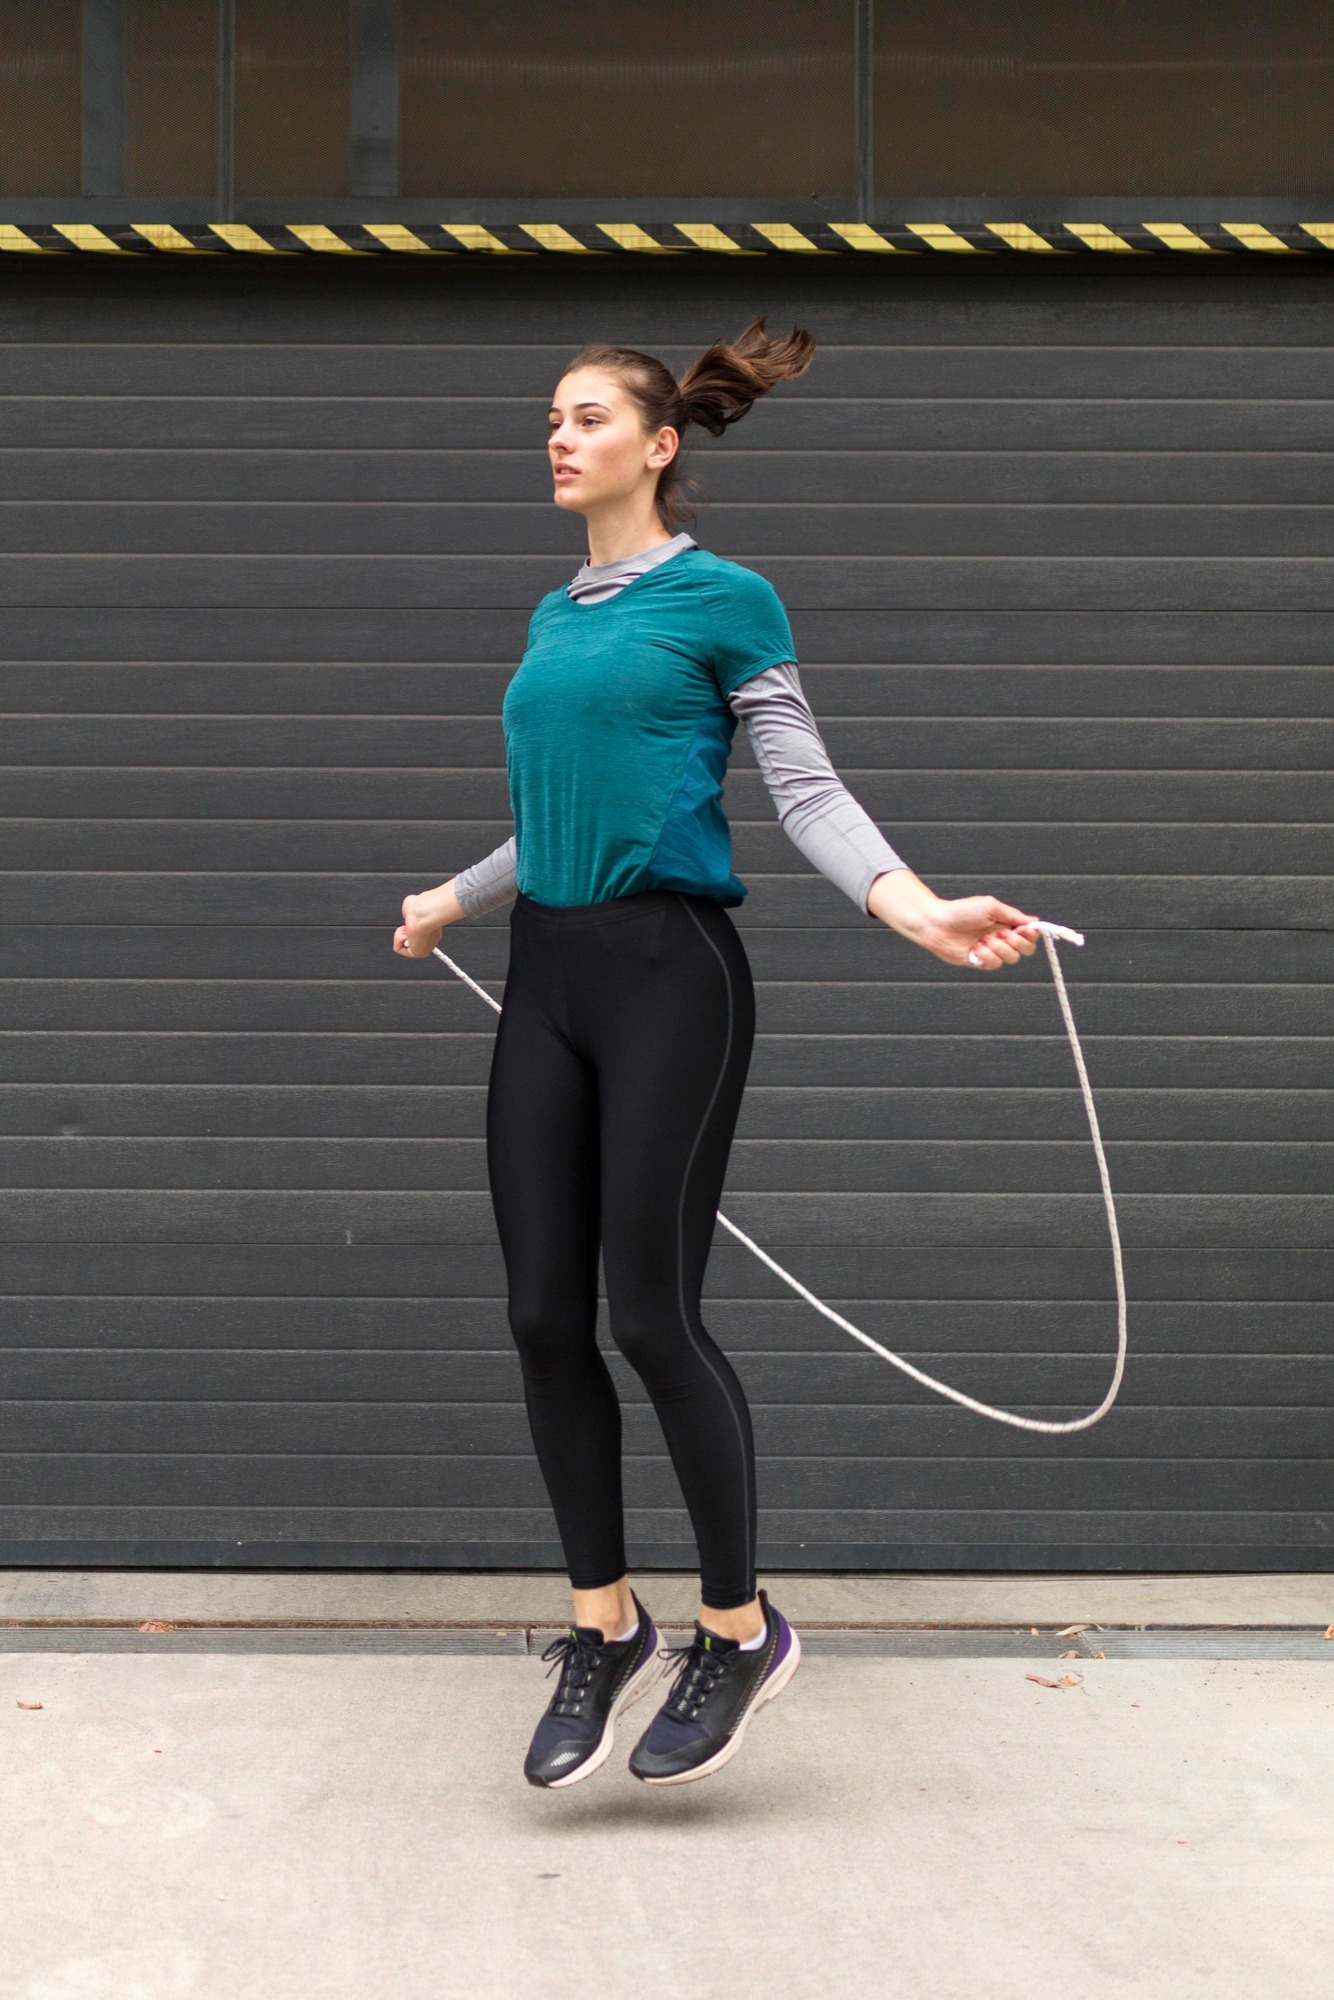 Jump Rope Routines for Fat Loss